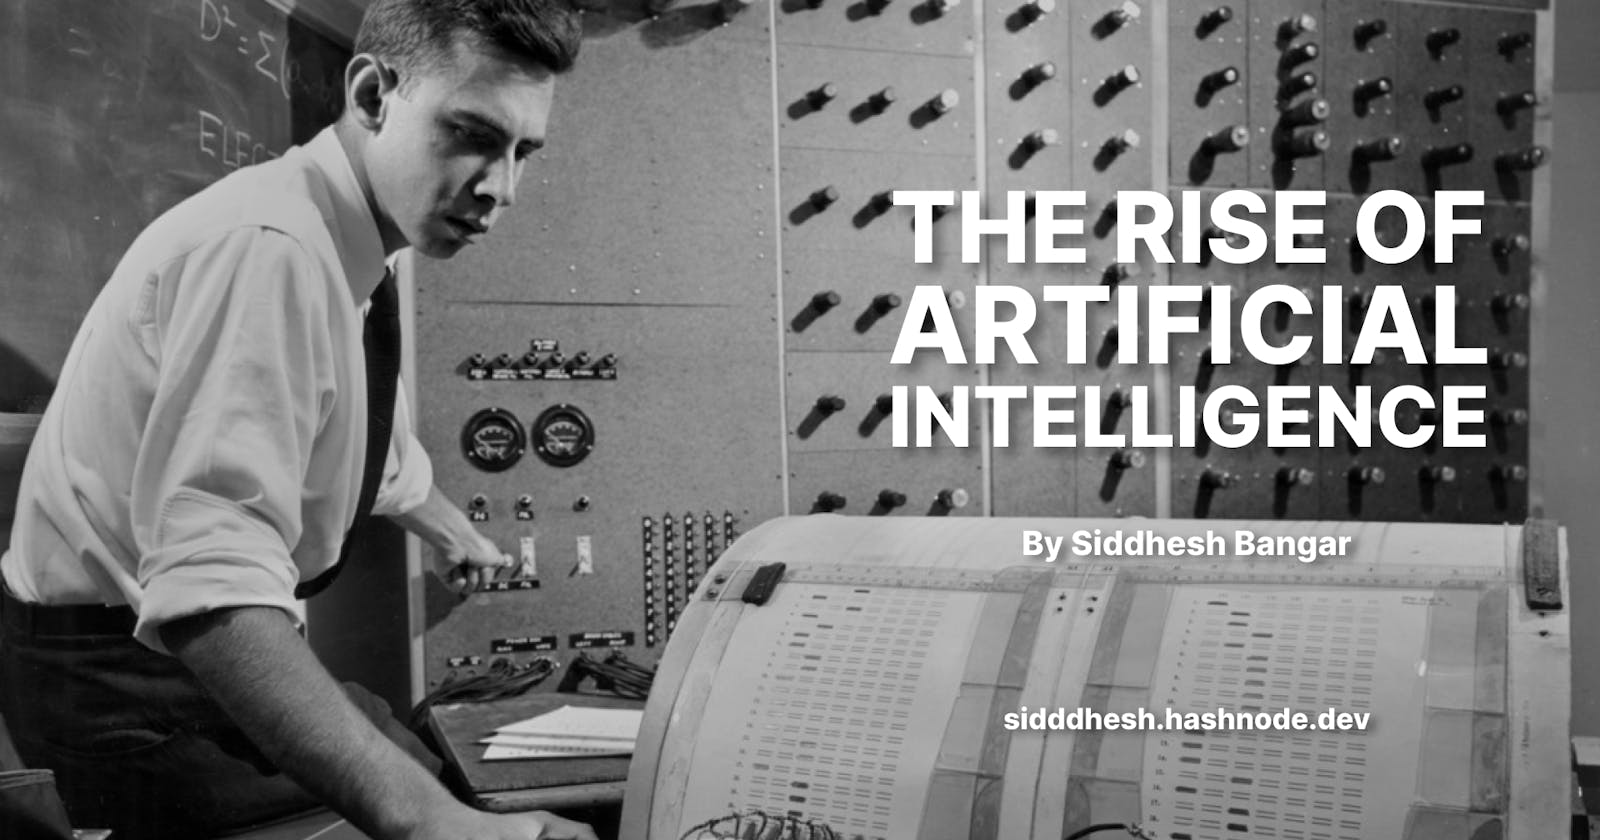 The Rise of Artificial Intelligence